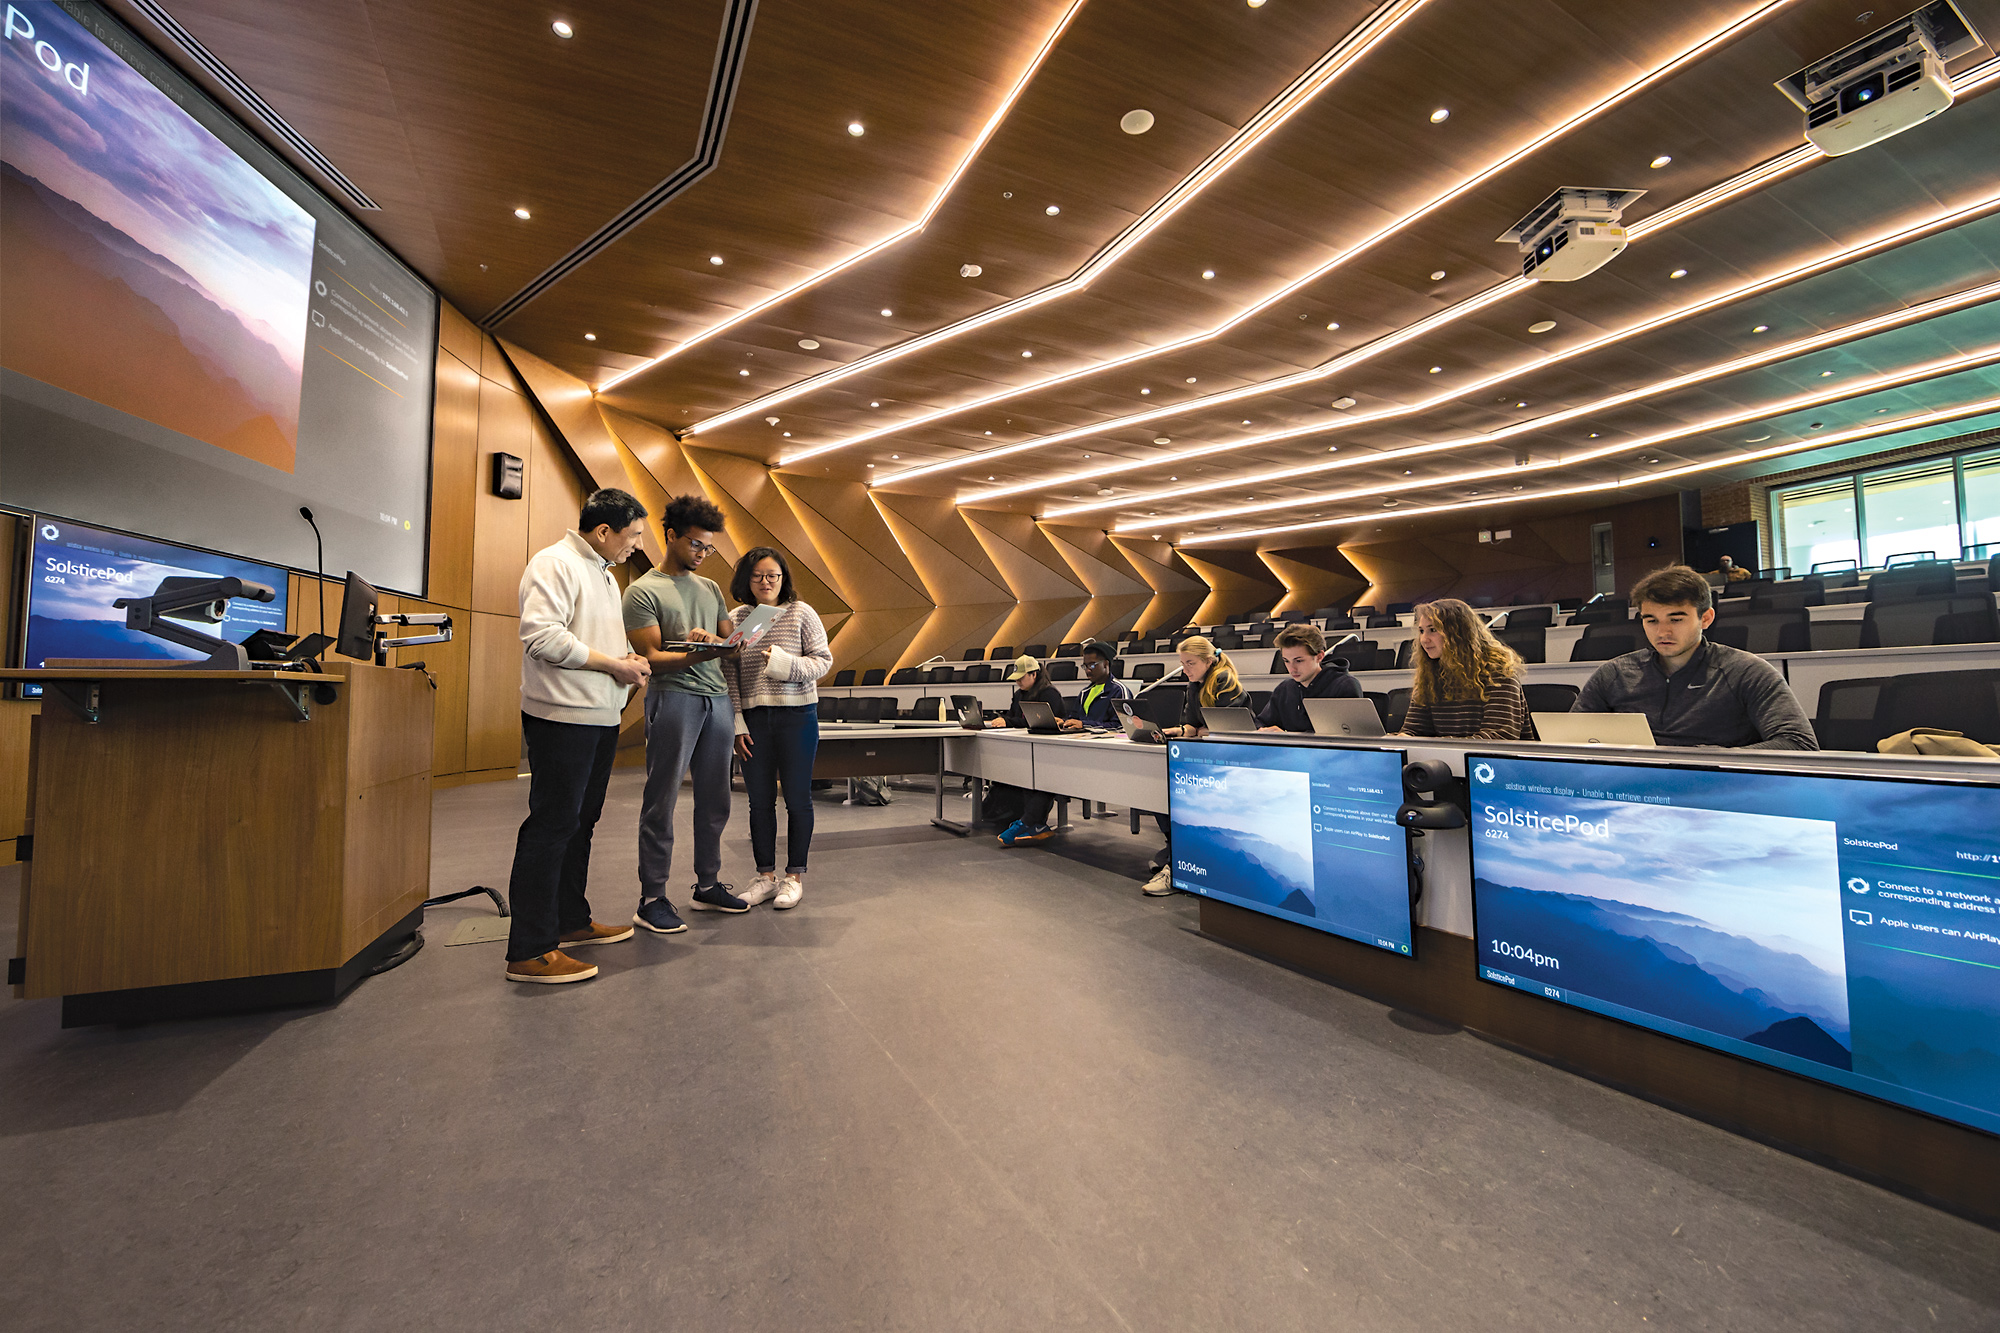 The Michael Antonov Auditorium, a wide room with multiple screens up front, tiered rows of tables, modern wood paneling on the hight ceiling and walls, and high-impact, semi-decorative track lighting. Two students are talking to a professor at the front of the room and the first row of seats is filled with students using laptops.